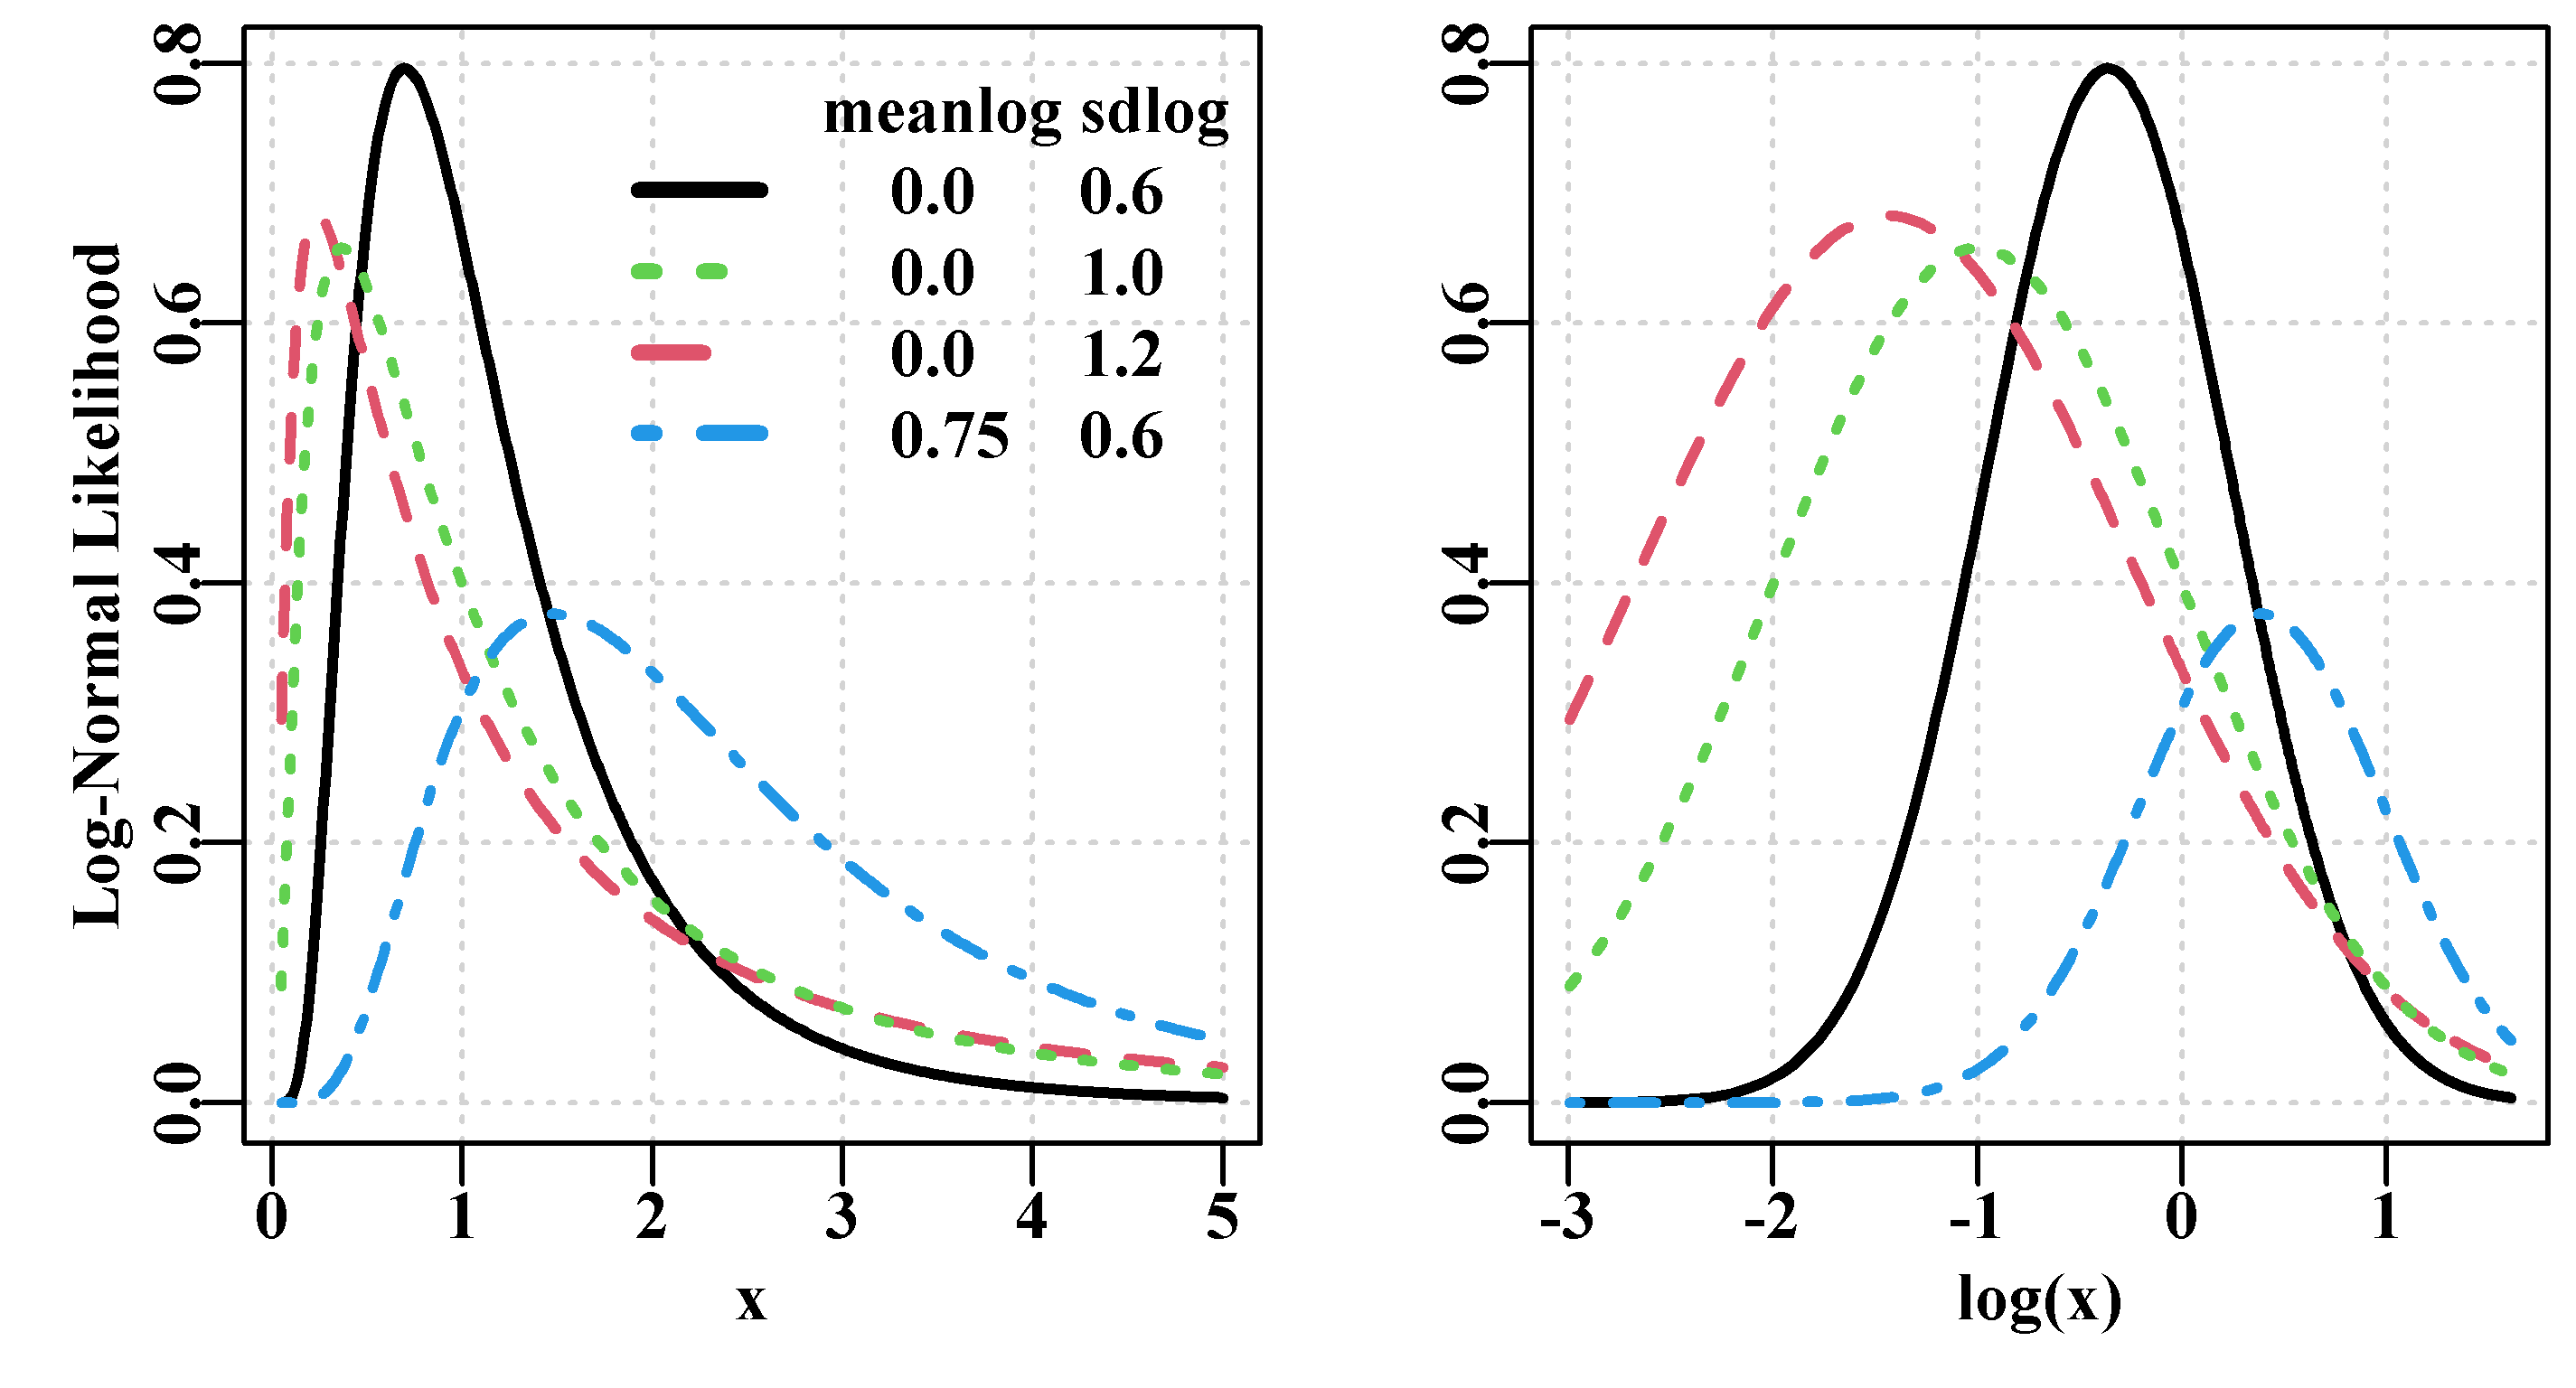 Two plots illustrating the Log-Normal probability density function. Left is a group of likelihood distributions for different parameter sets, while right is the log-transformed versions of these first four Log-Normal distributions. 